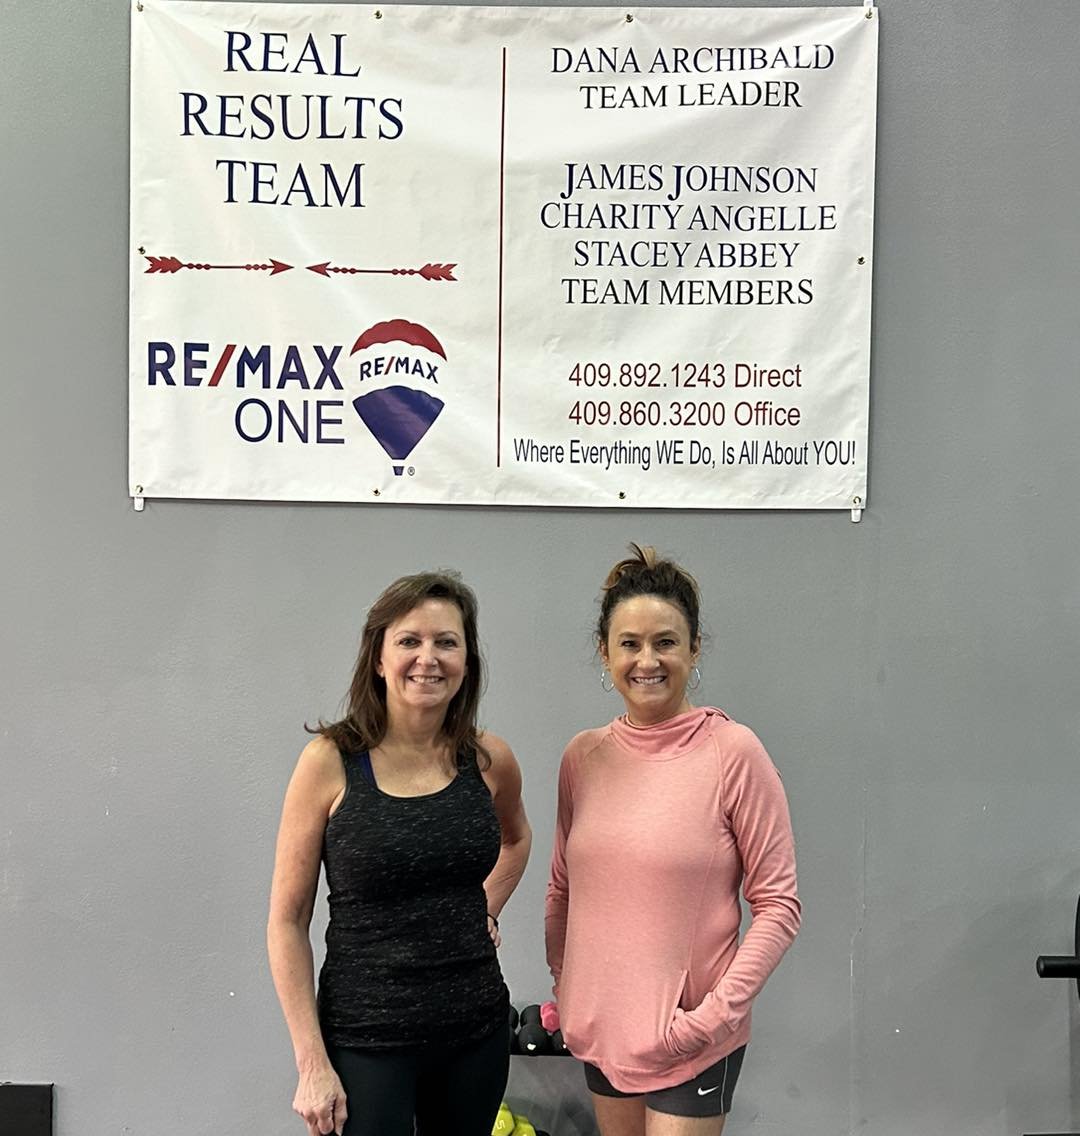 We are so excited and honored that the REal Results Team is going to sponsor our Q2 Committed Club members. This will allow for us to award the top class earner with a fitness inspired prize package worth $200!!! We will also be able to gift each of 